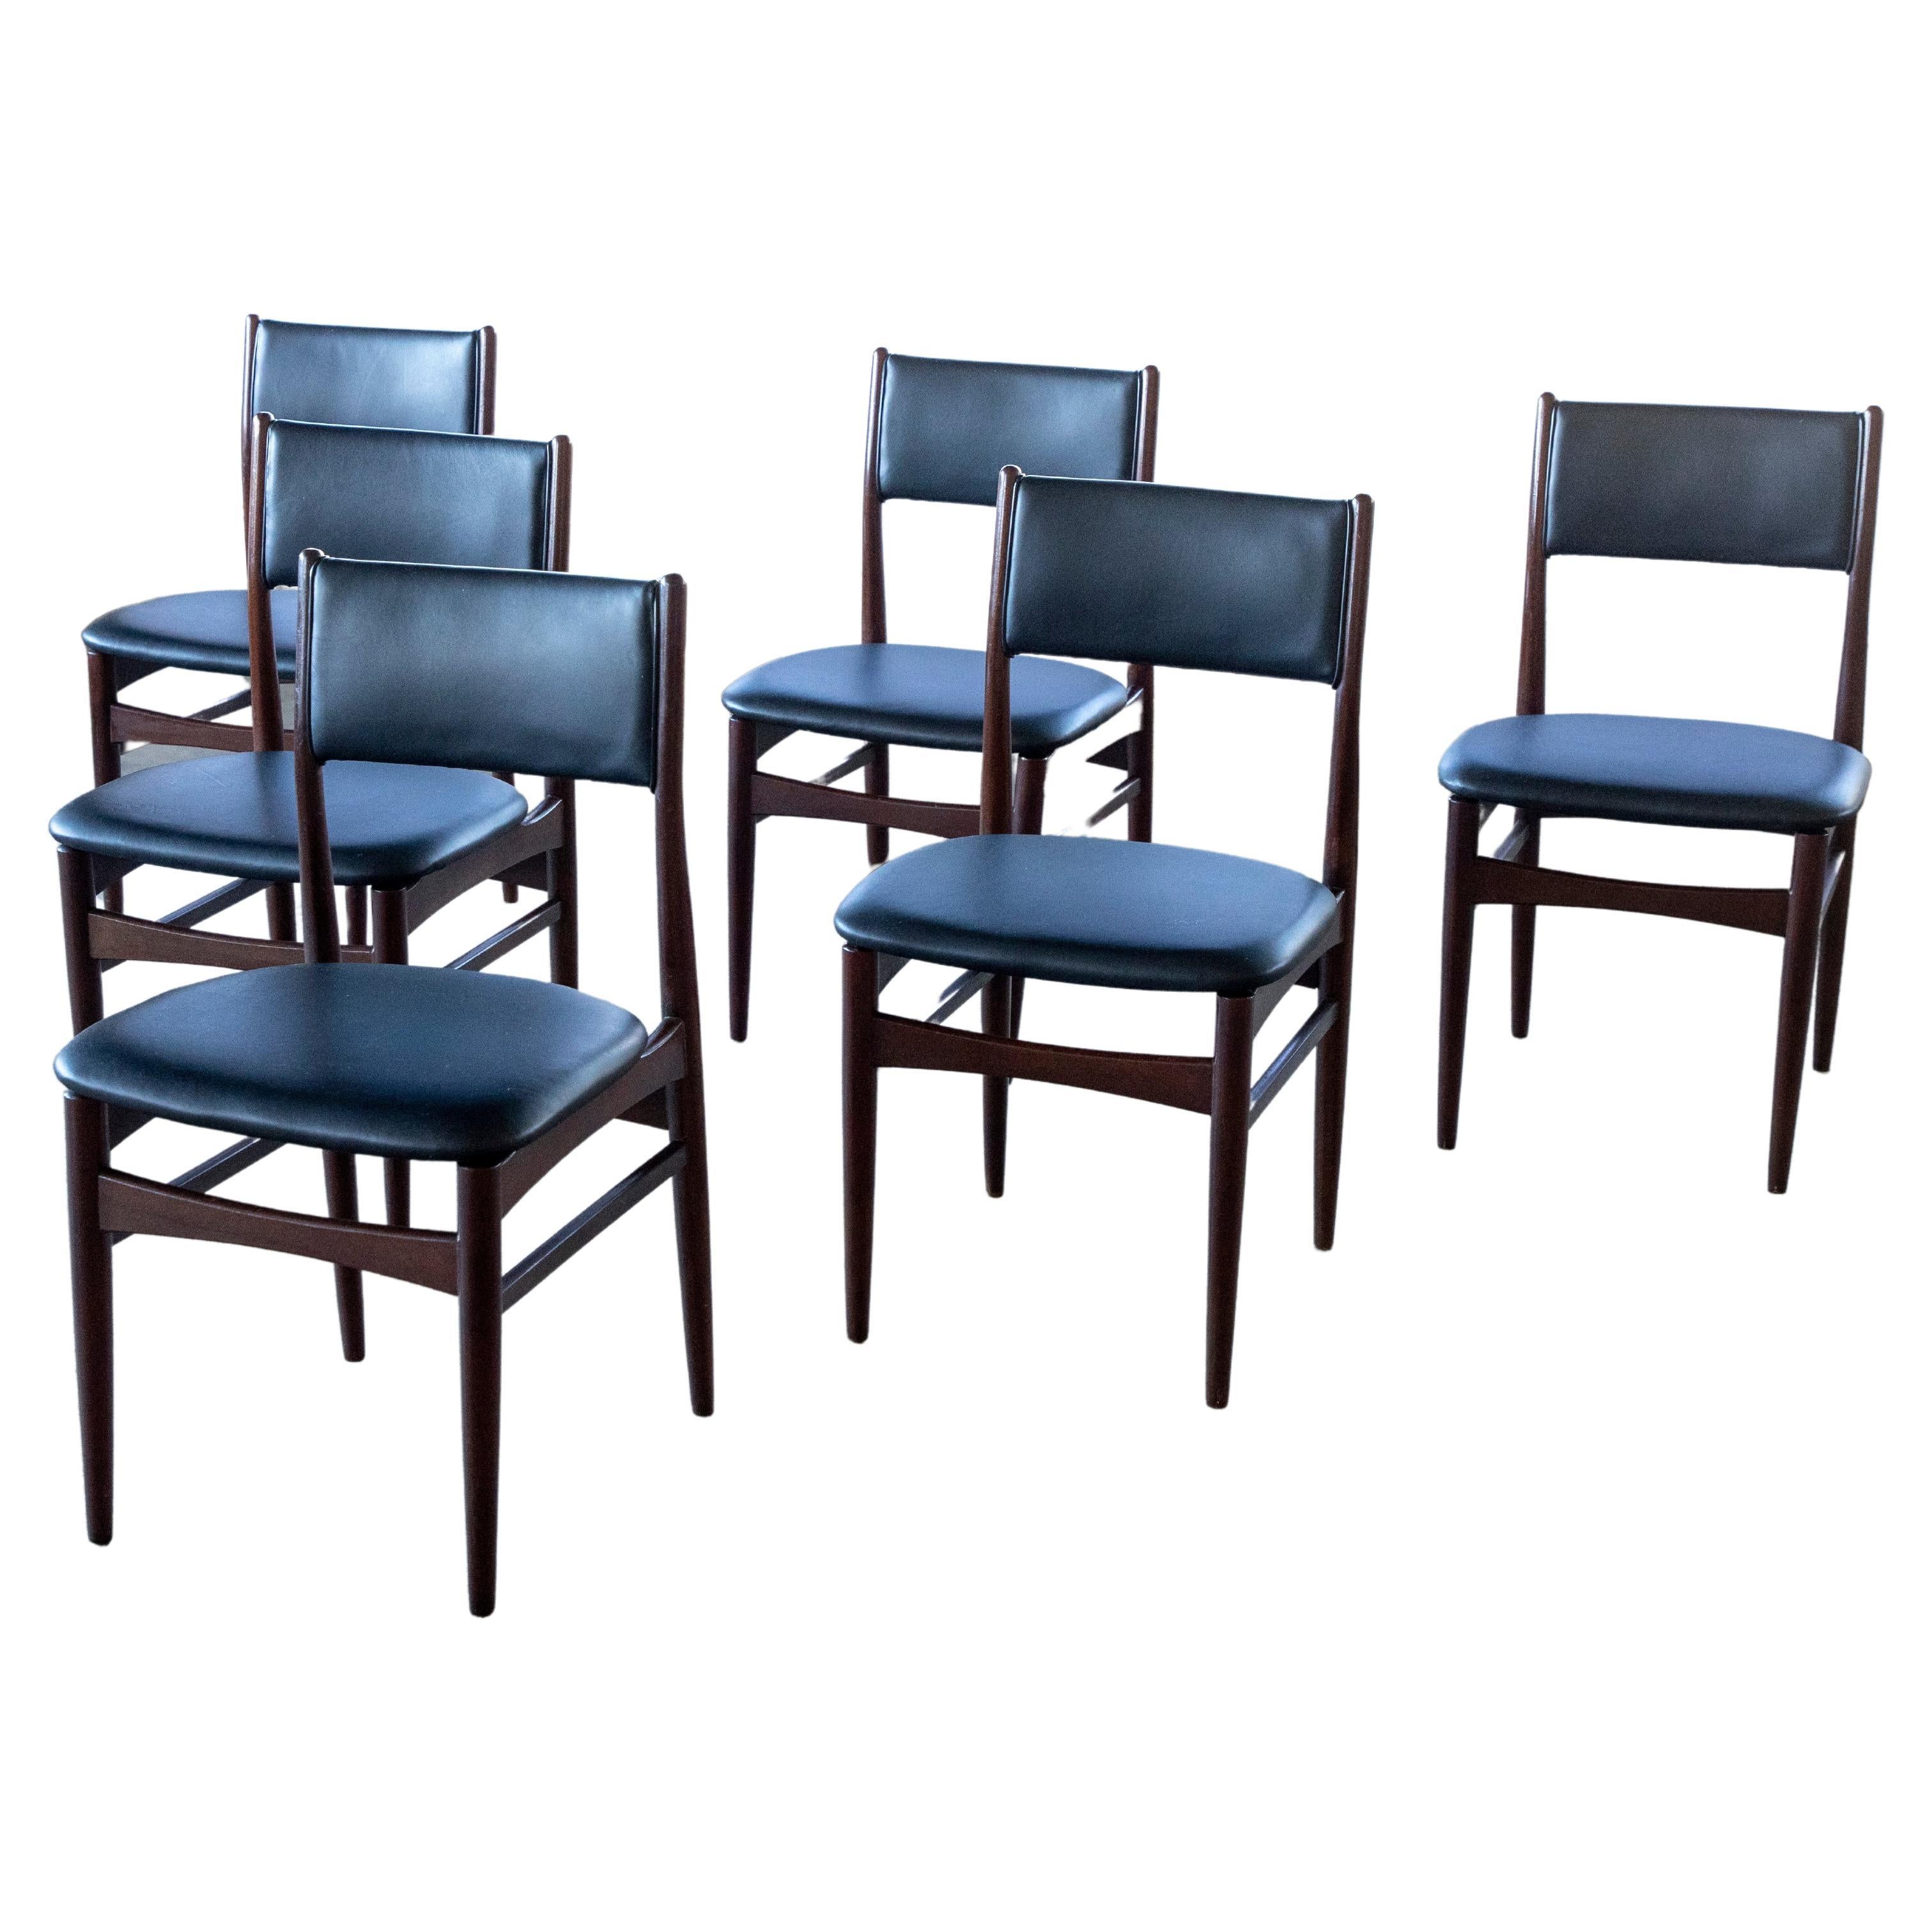 Set of 6 Danish Midcentury Dining Chairs in Teak and Black Leather For Sale